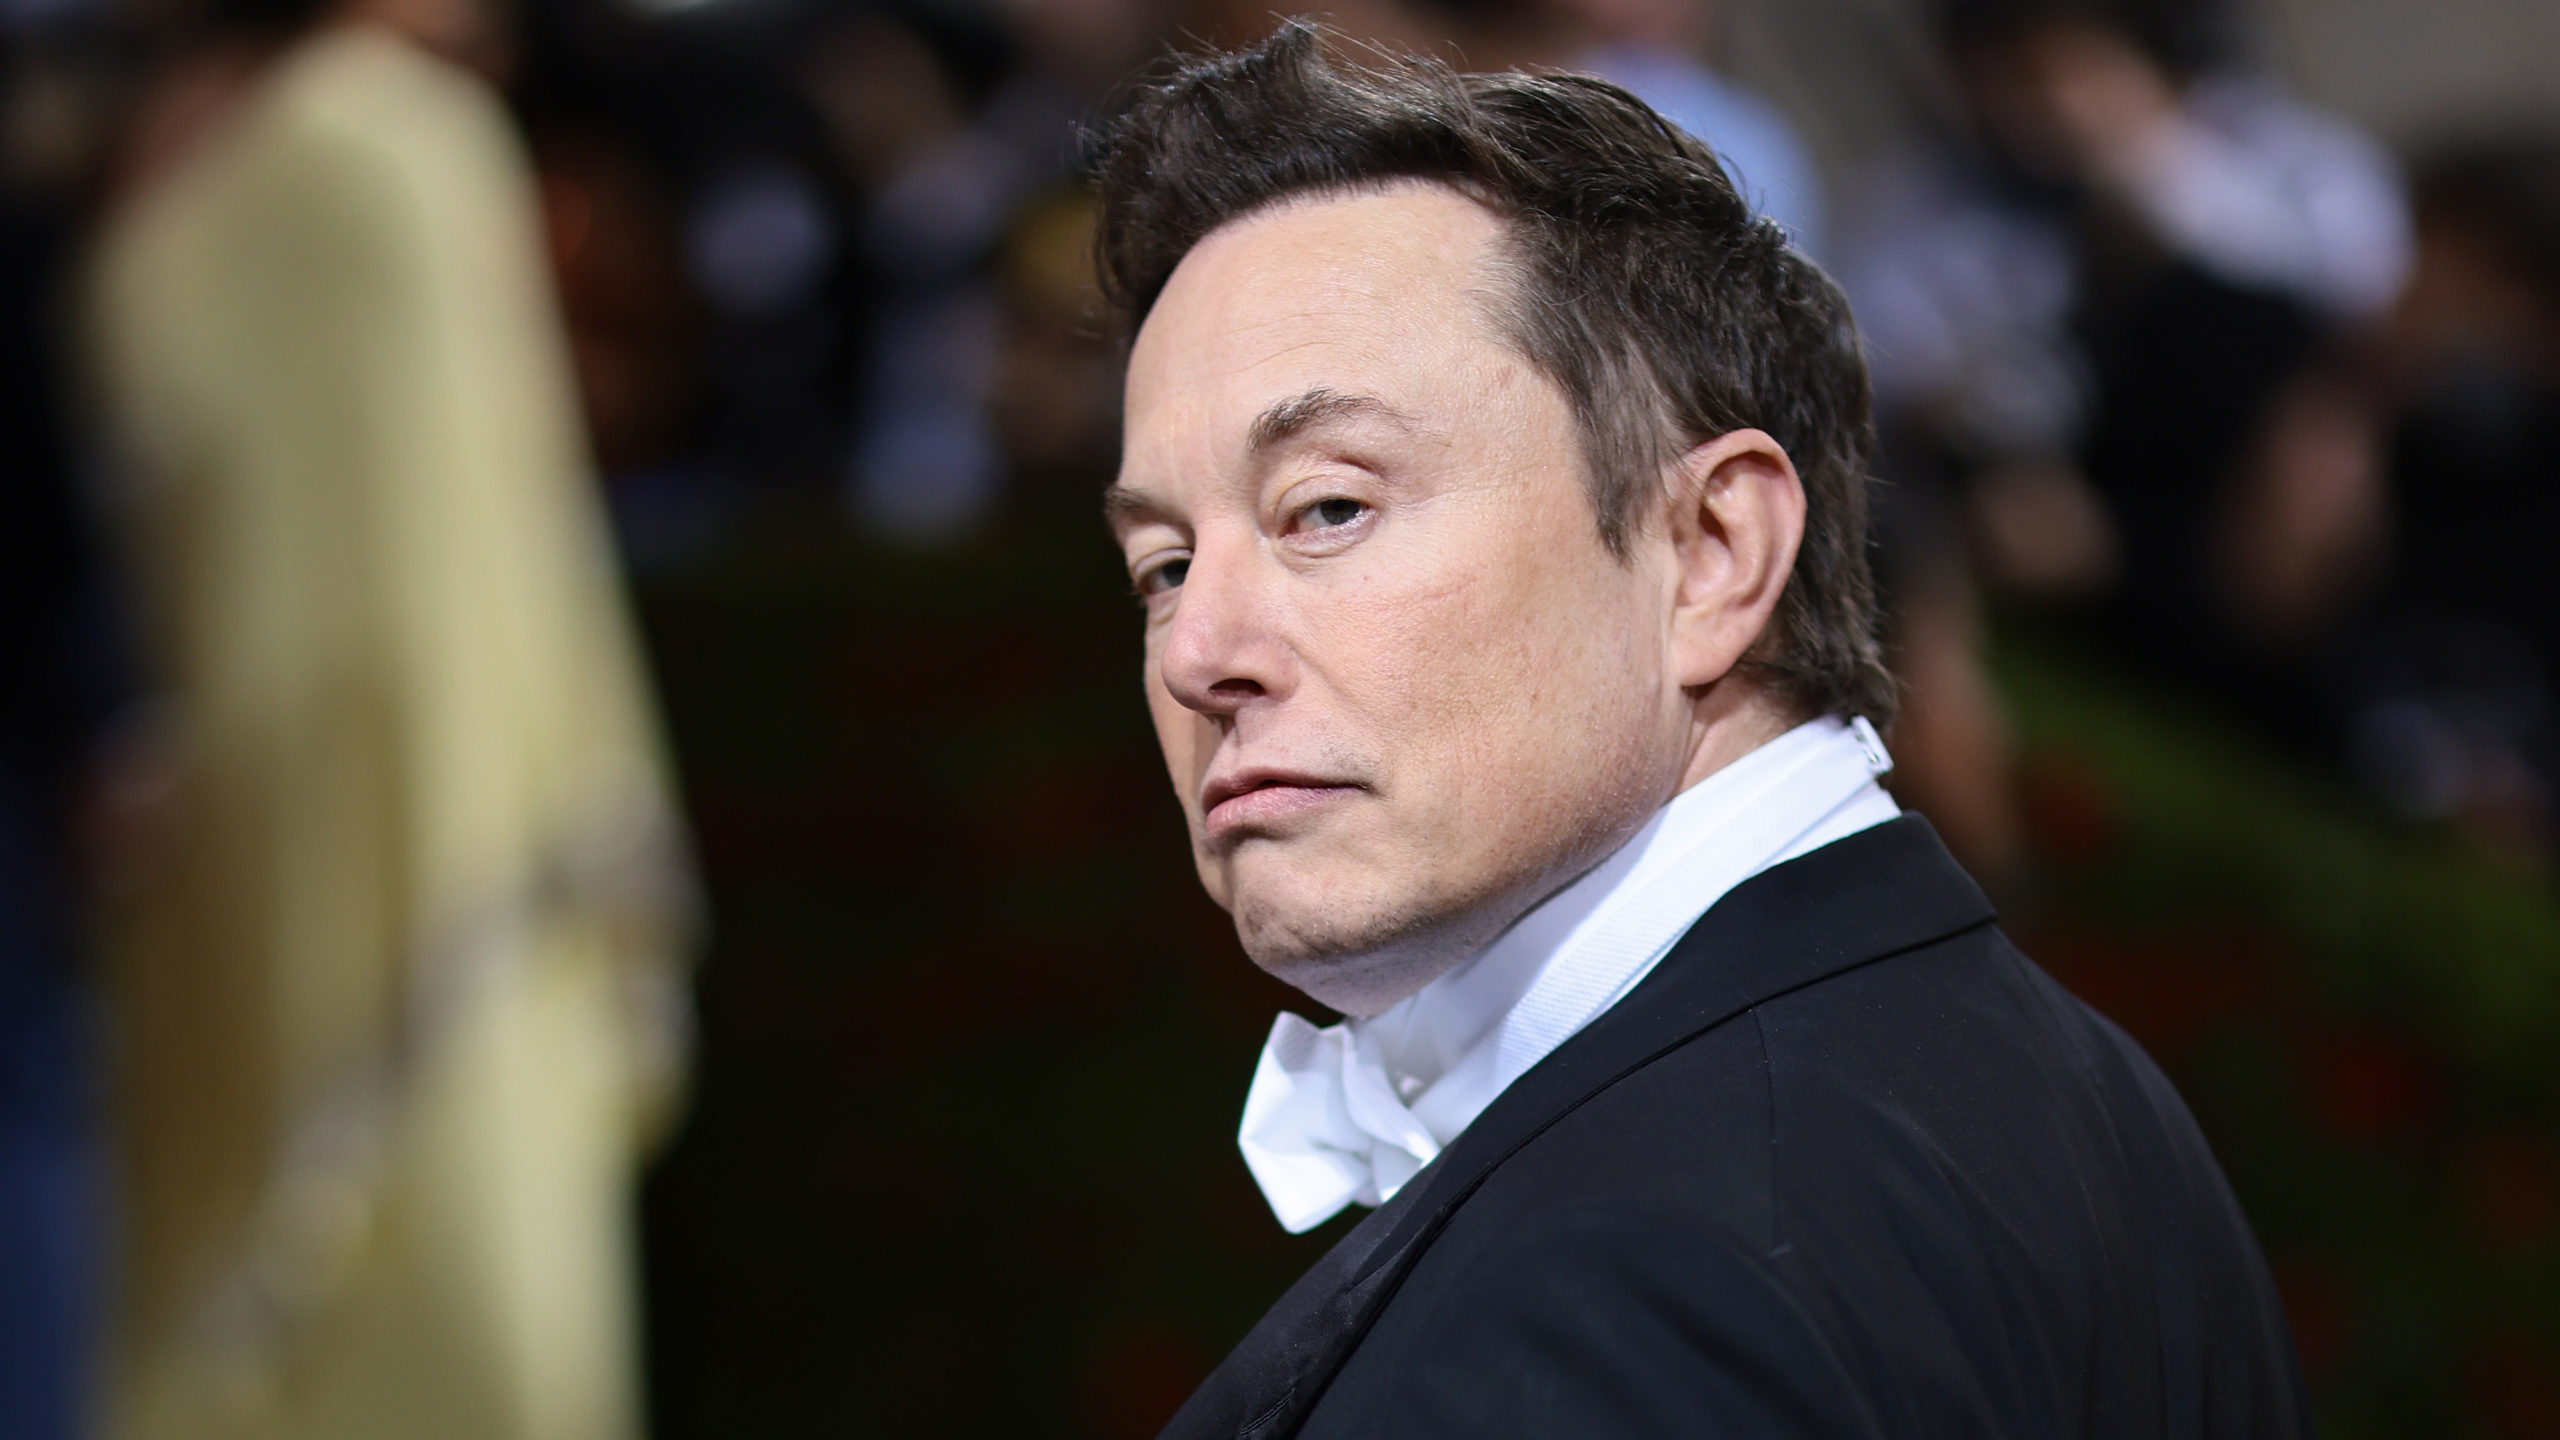 elon musk has taken control of twitter and fired its top executives